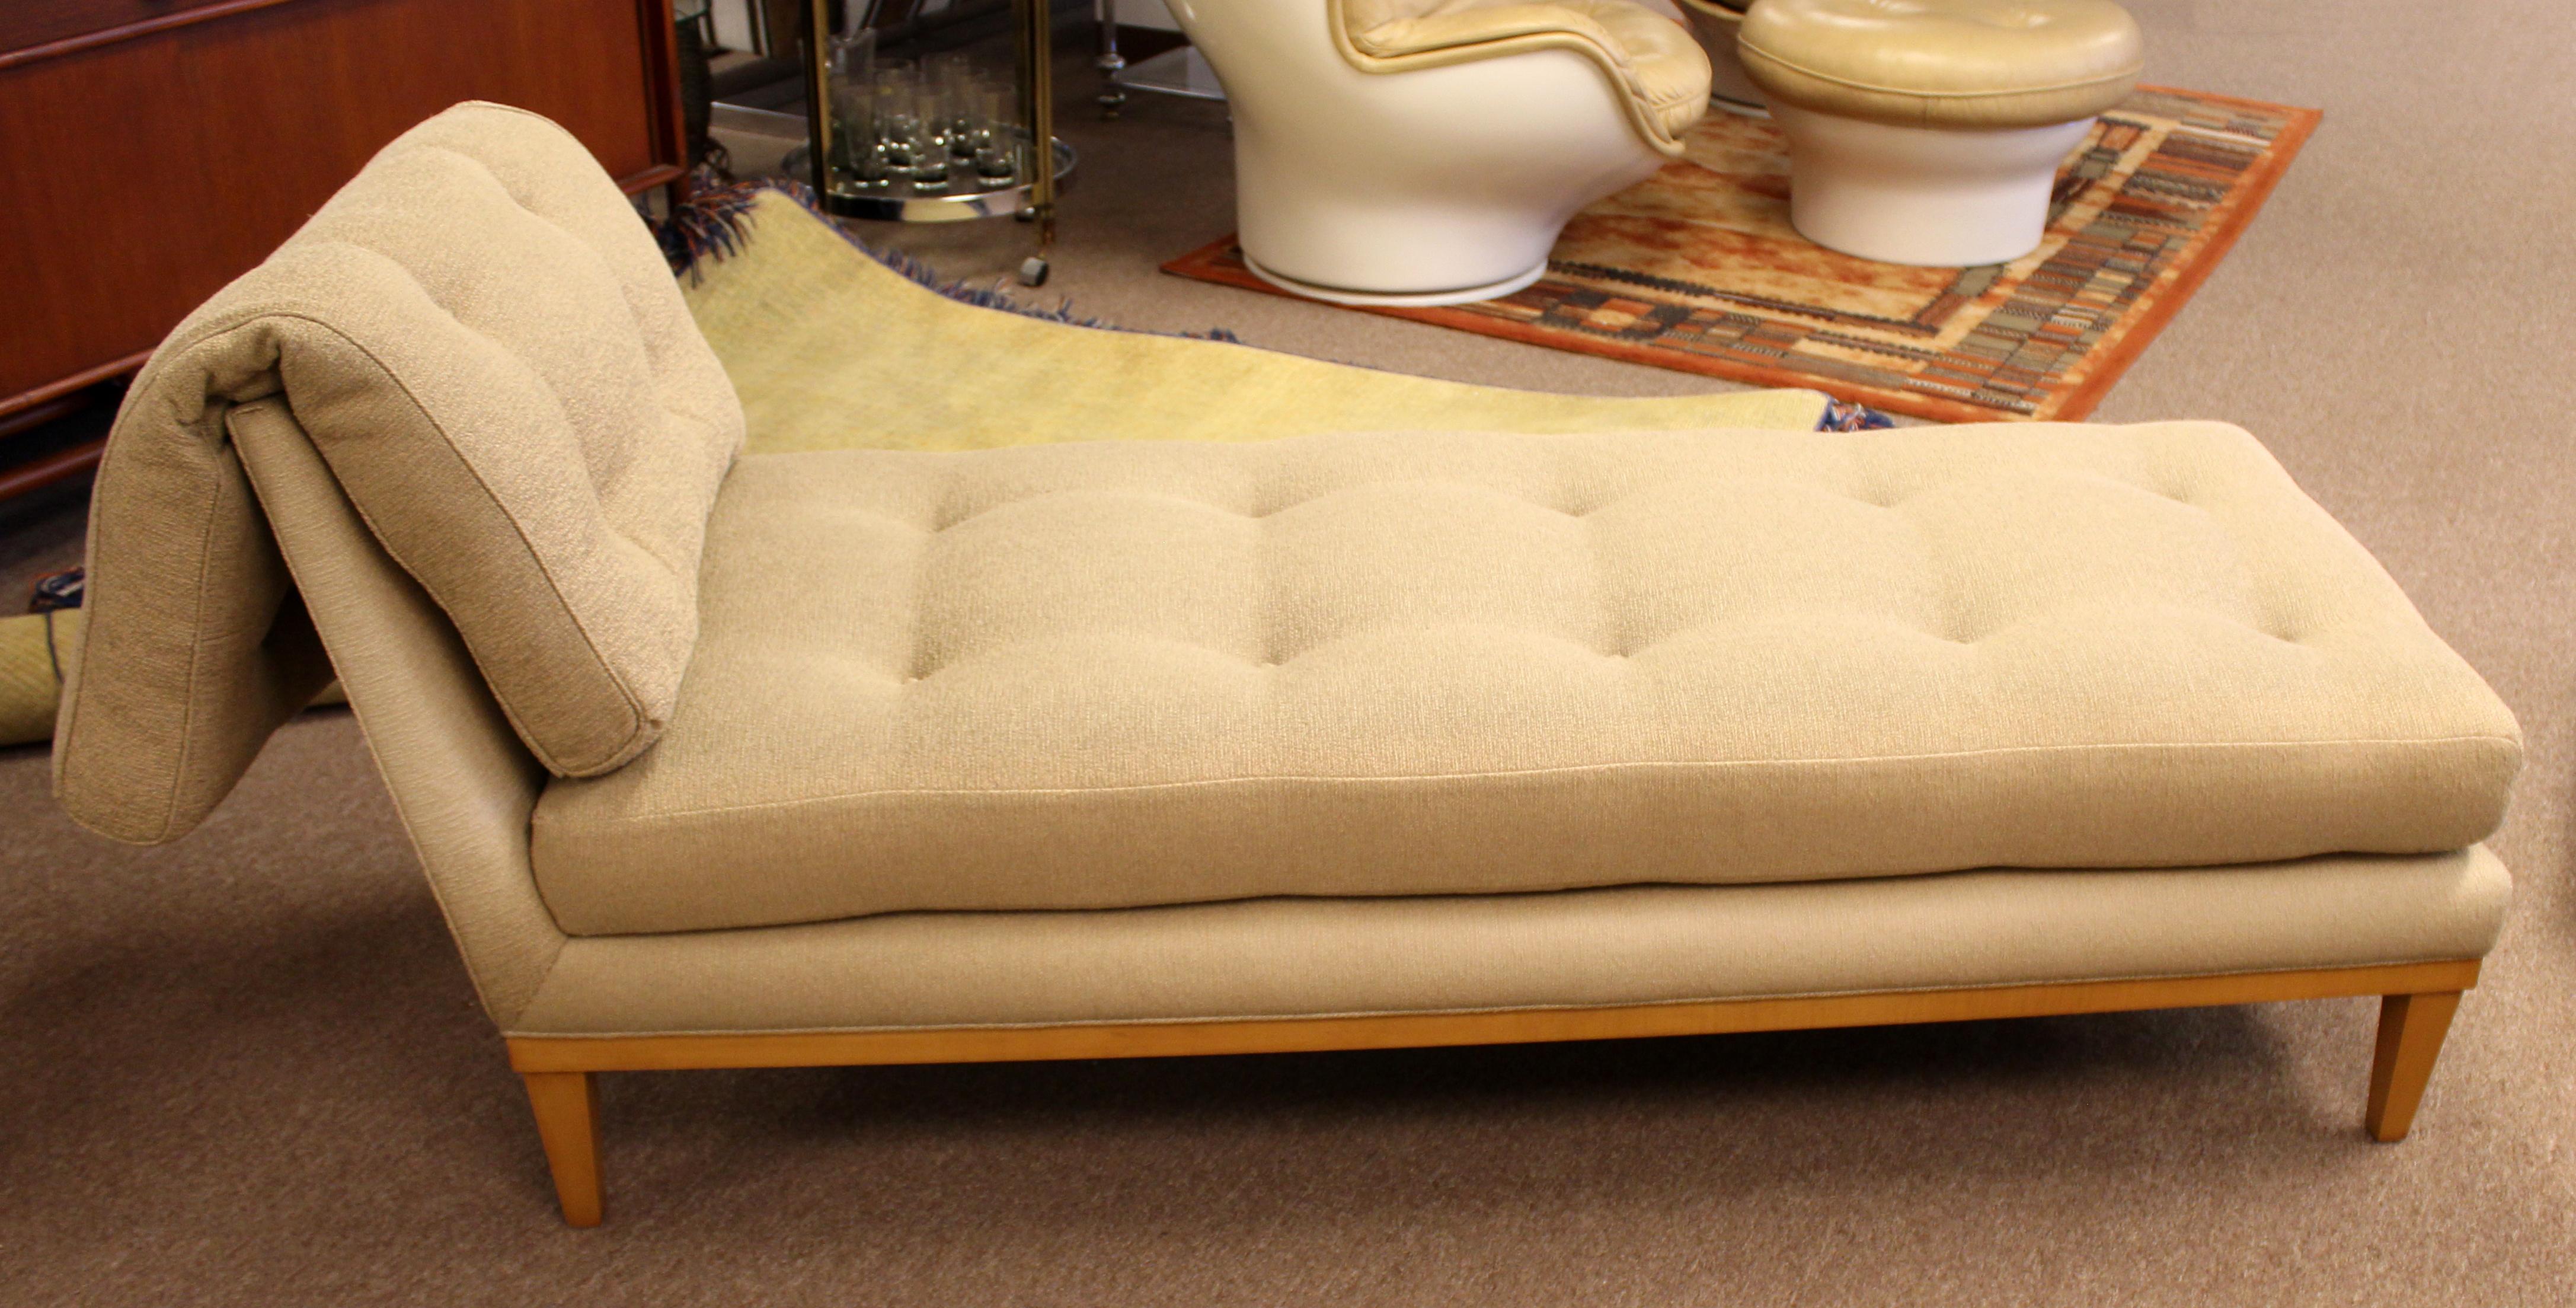 For your consideration is a spectacular, Classic daybed or chaise, on wood legs, by Patrick Naggar for Ralph Pucci, made in France. In good condition. The dimensions are 67